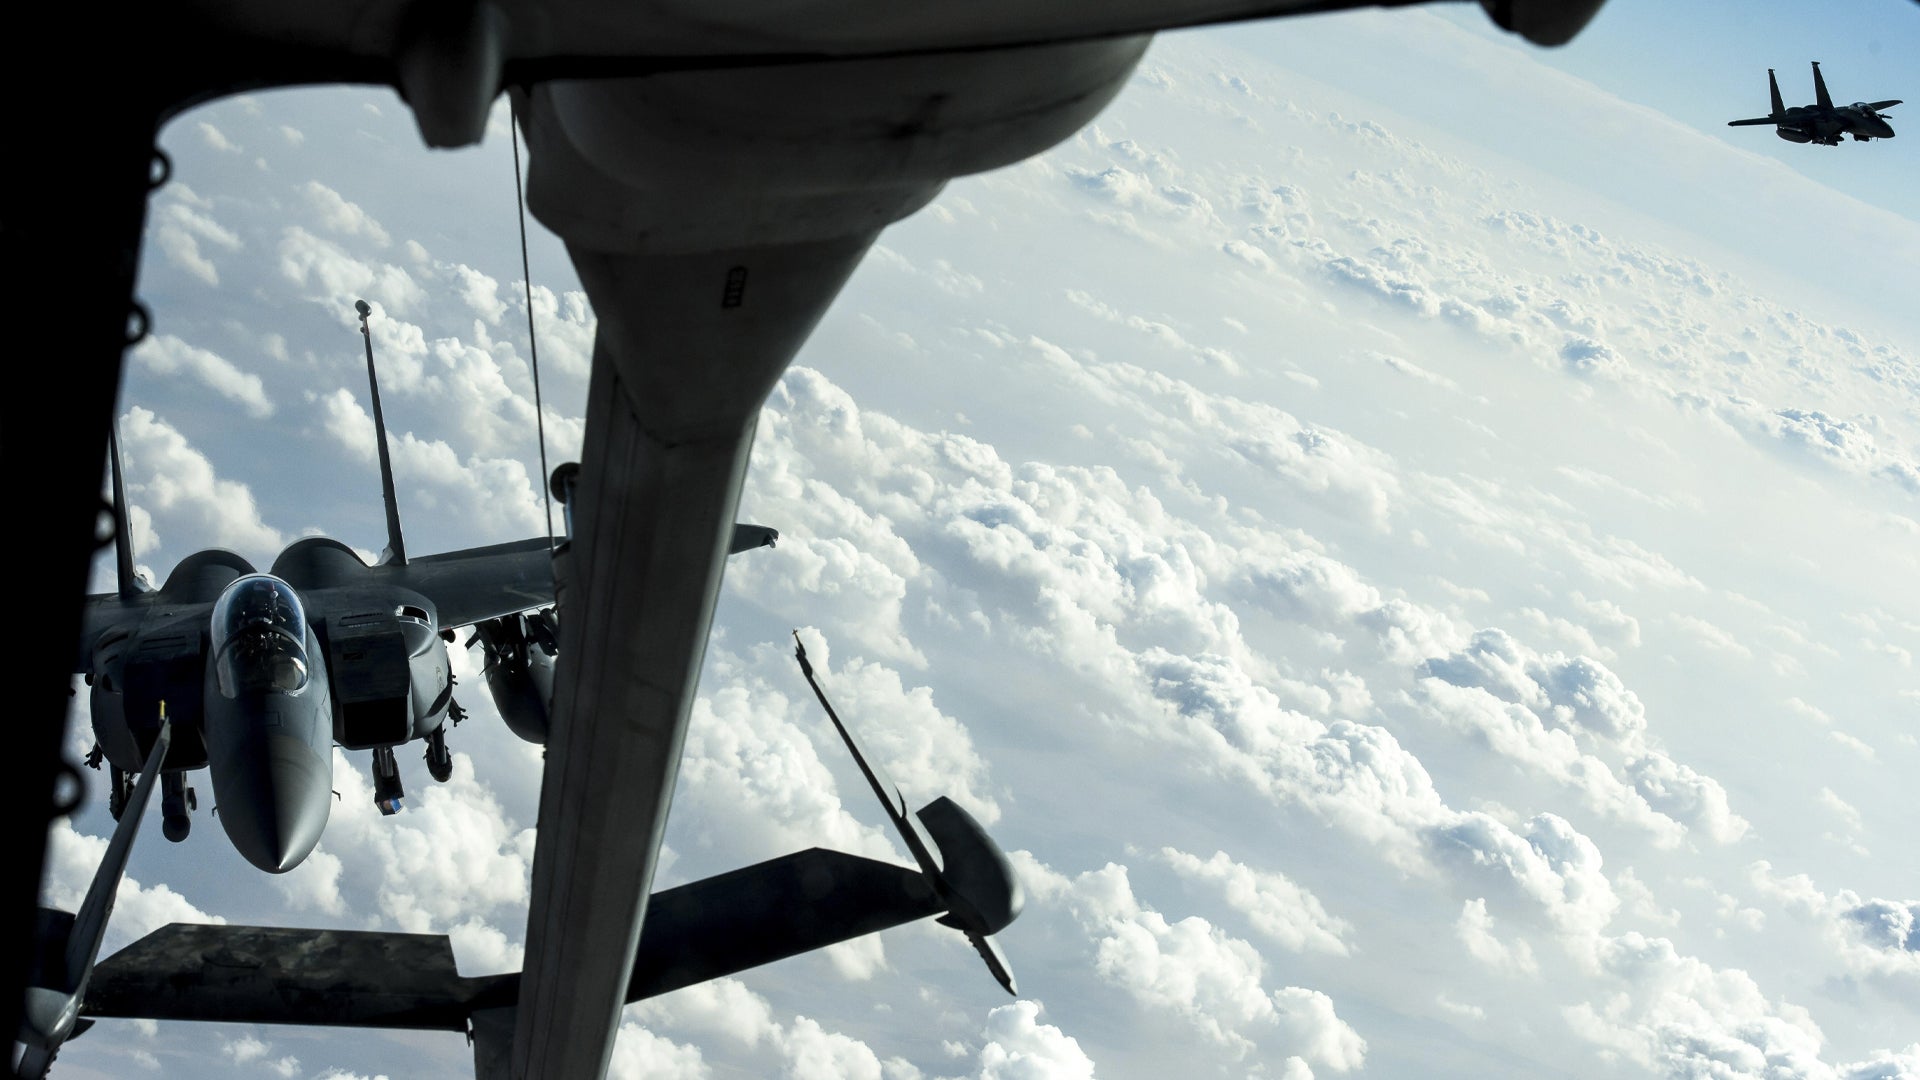 Two F-15E Strike Eagles prepare to receive fuel from a KC-10 Extender over Iraq, Dec. 25, 2016. The F-15s were providing precision guided close air support during Combined Joint Task Force-Operation Inherent Resolve, a multinational effort to weaken and destroy the Islamic State in Iraq and the Levant. (Senior Airman Tyler Woodward/U.S. Air Force)